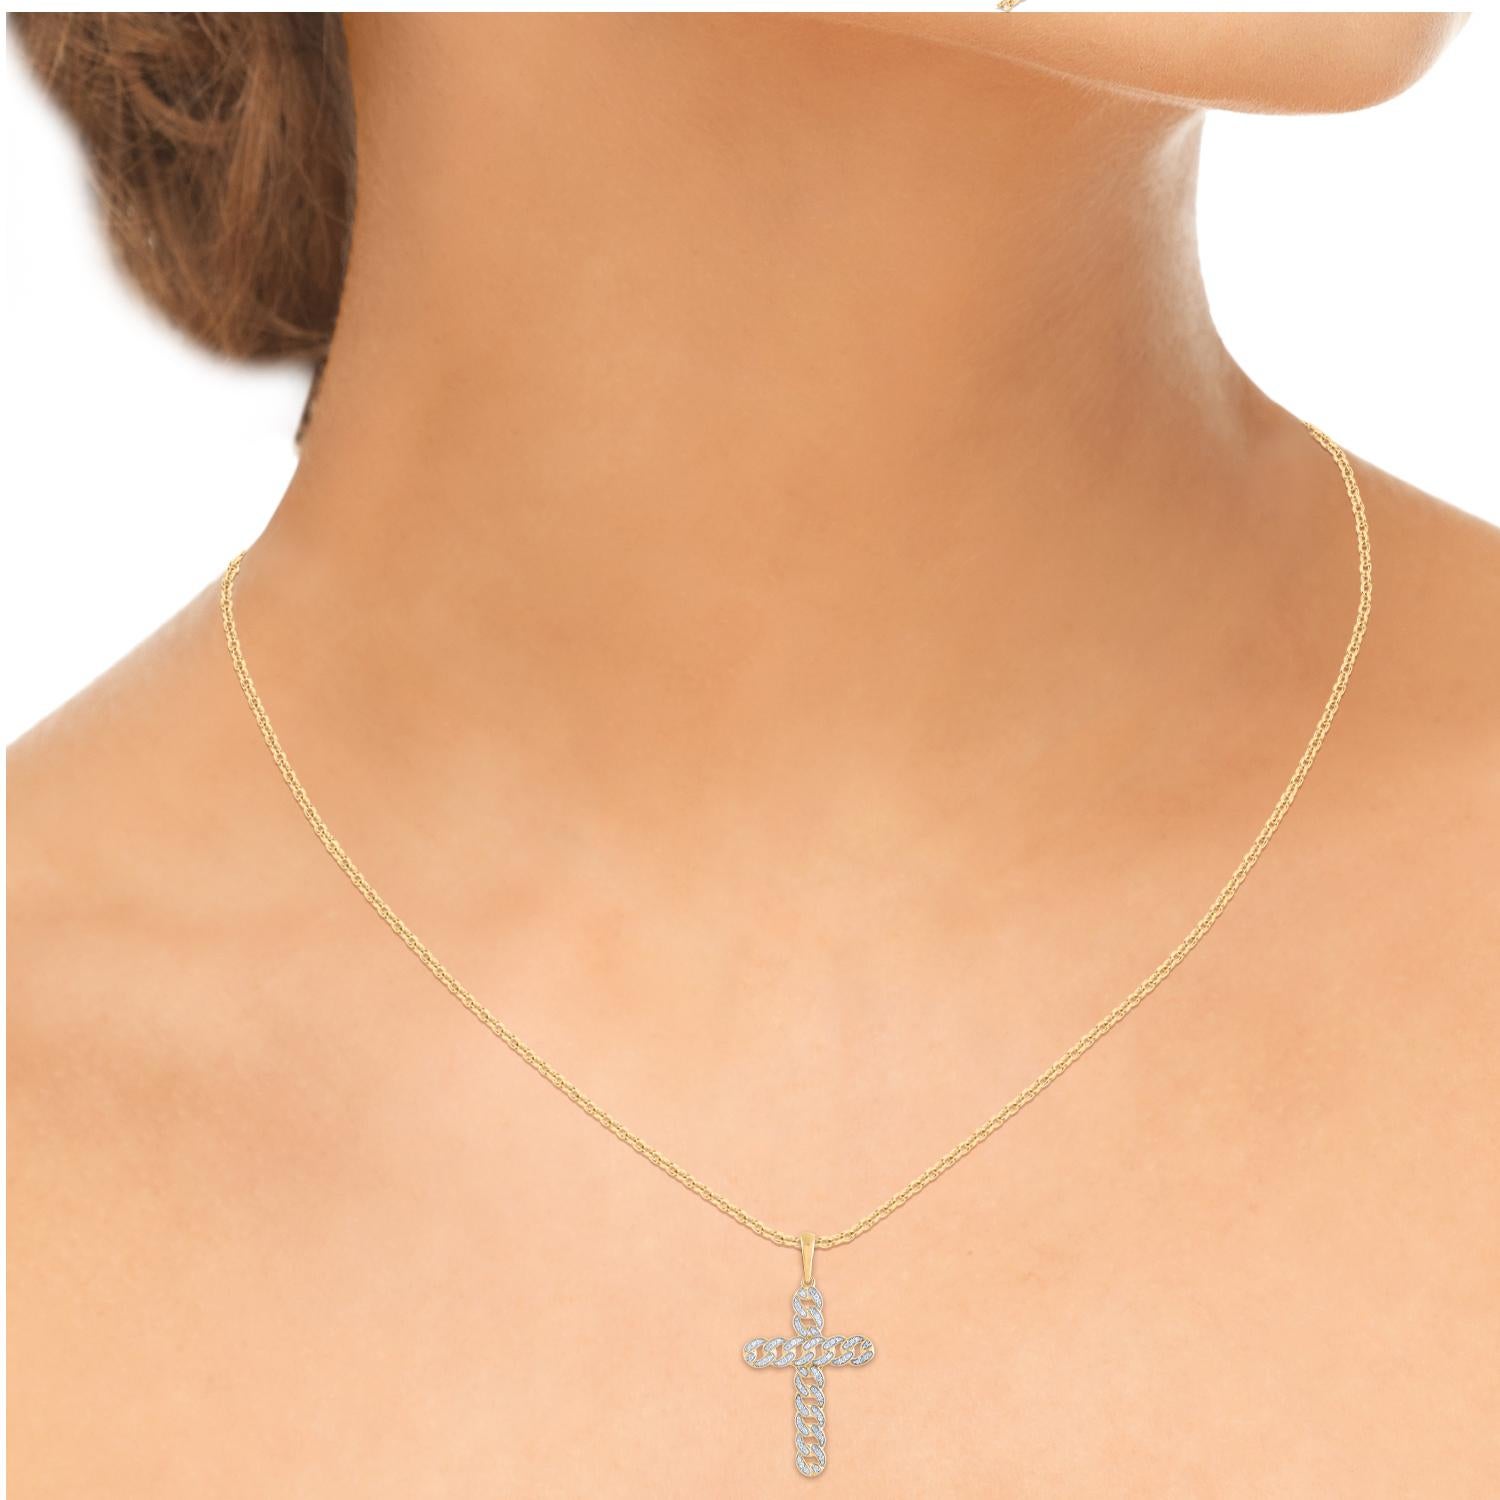 TJD 0.20 Carat Round Cut Diamond Cross Pendant Necklace in 14KT Yellow Gold In New Condition For Sale In New York, NY